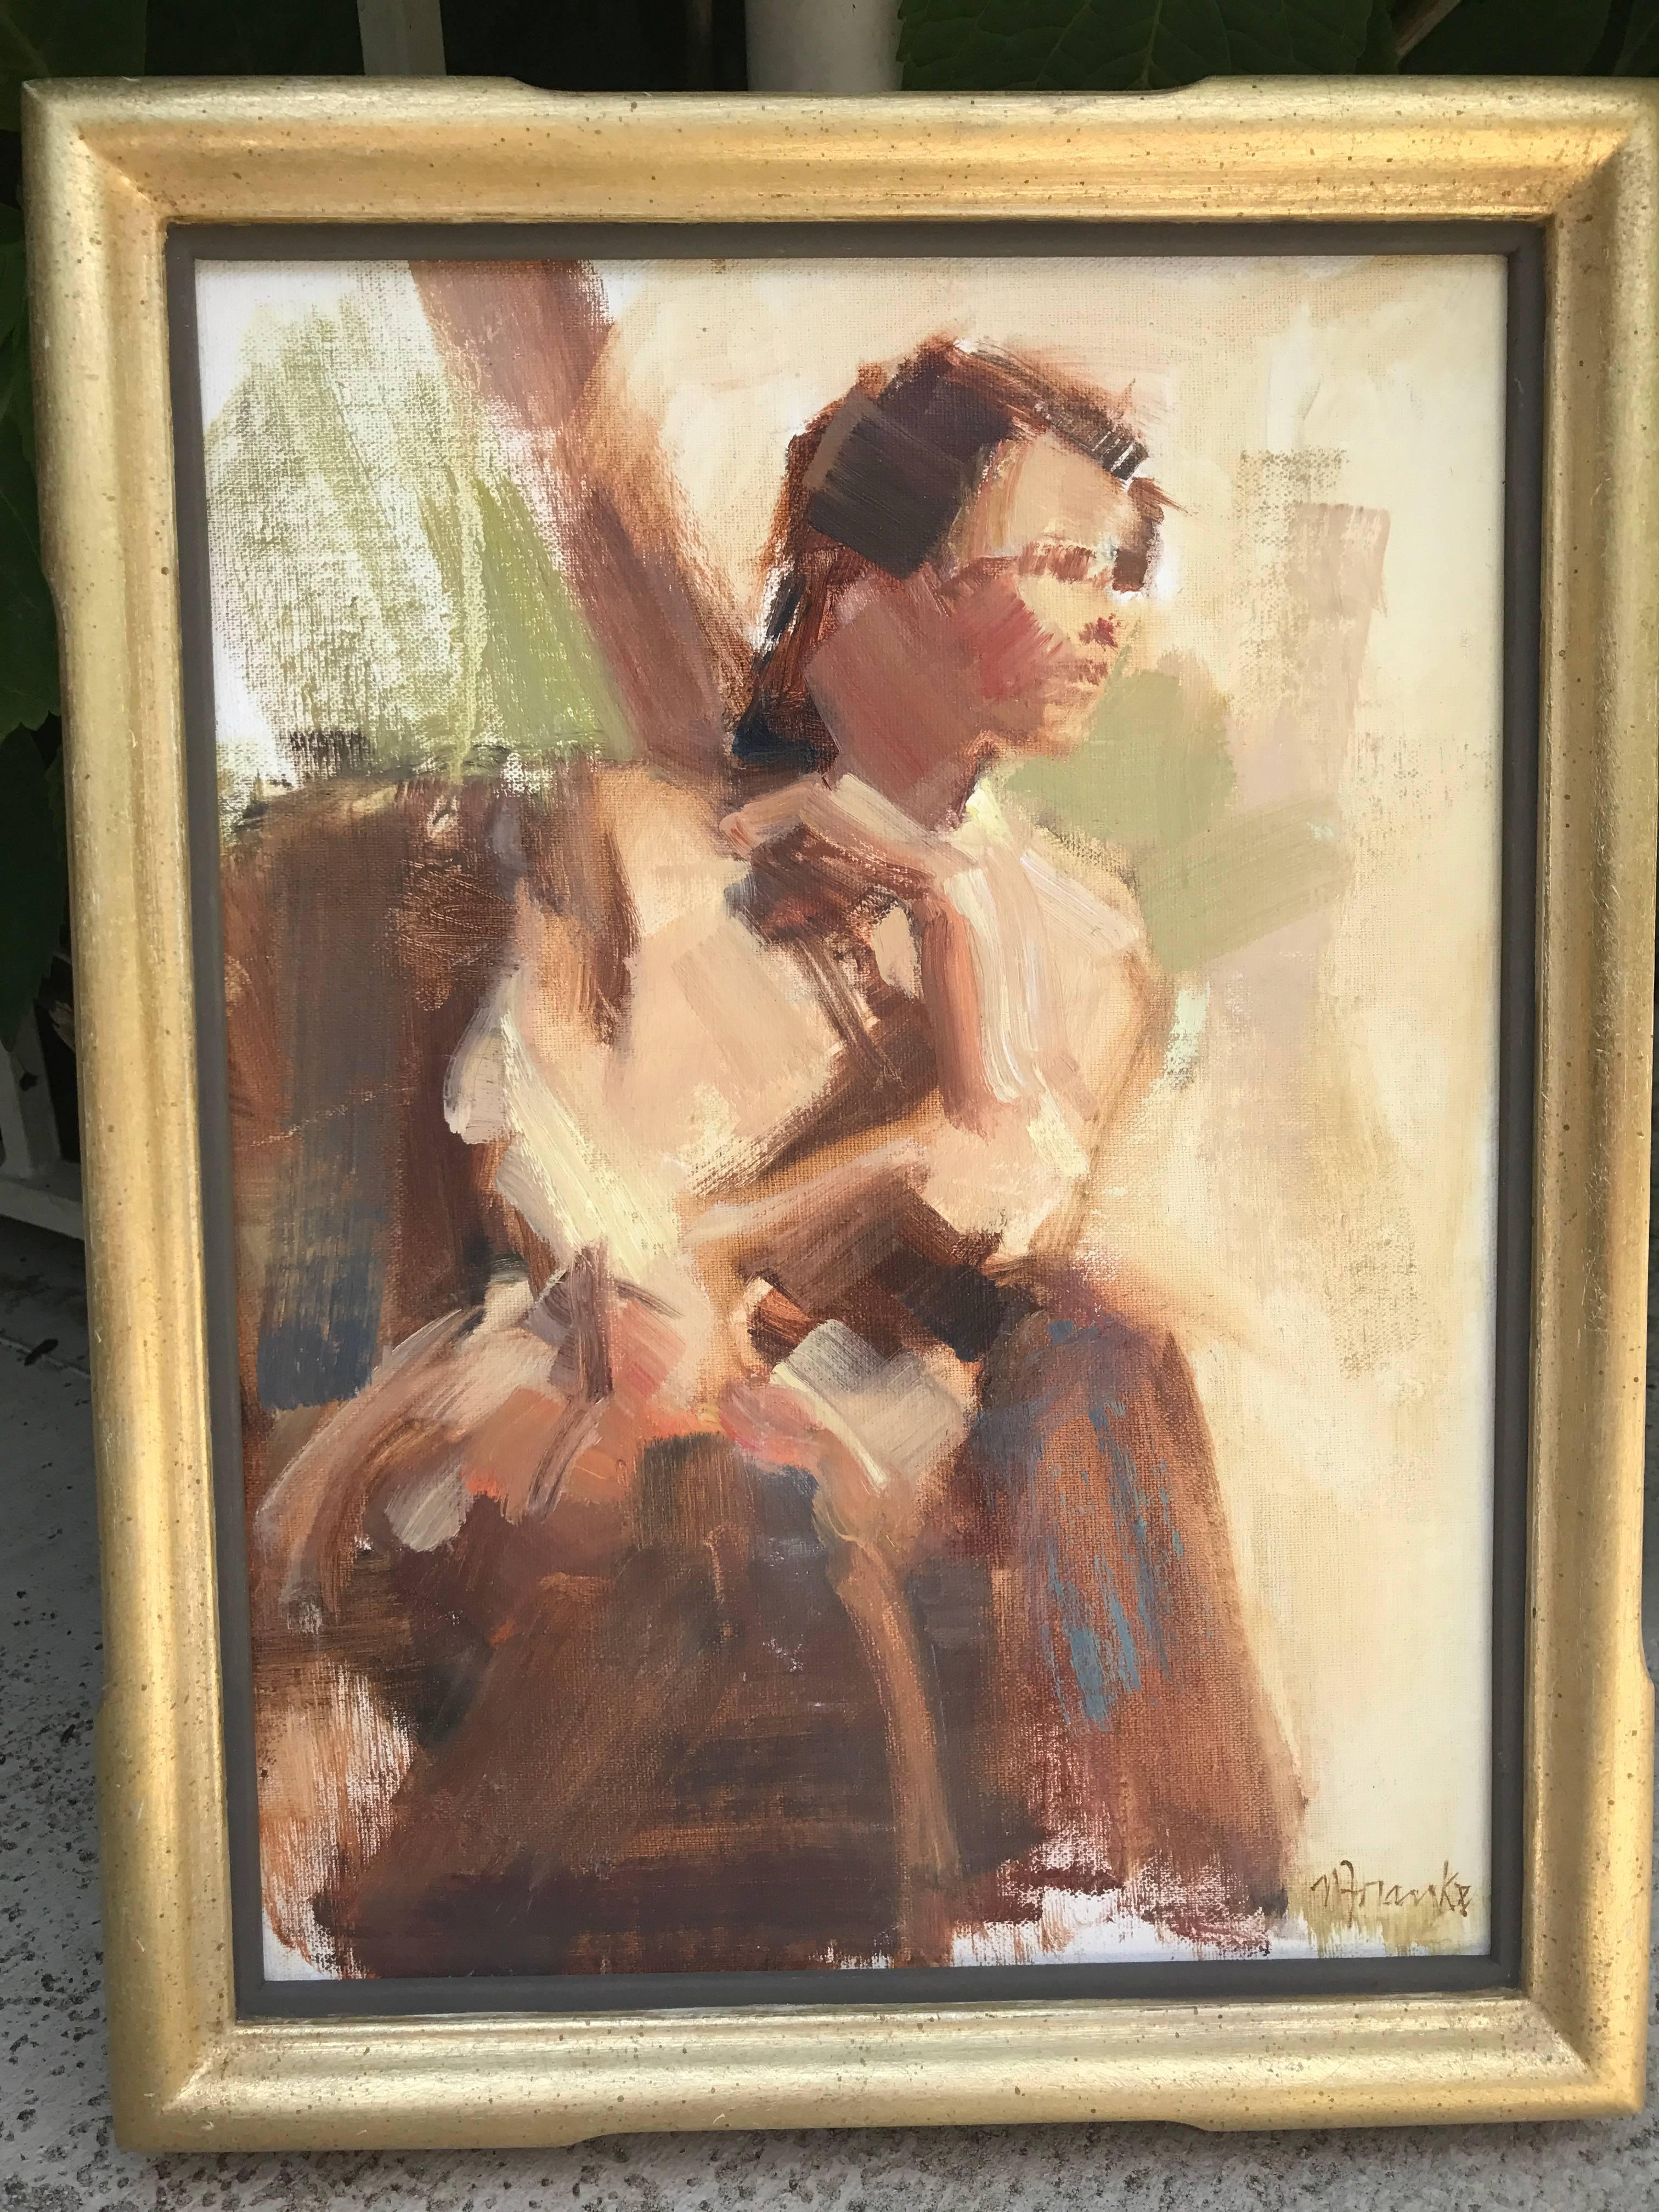 The Thoughtful Pose - Impressionist Painting by Nancy Franke